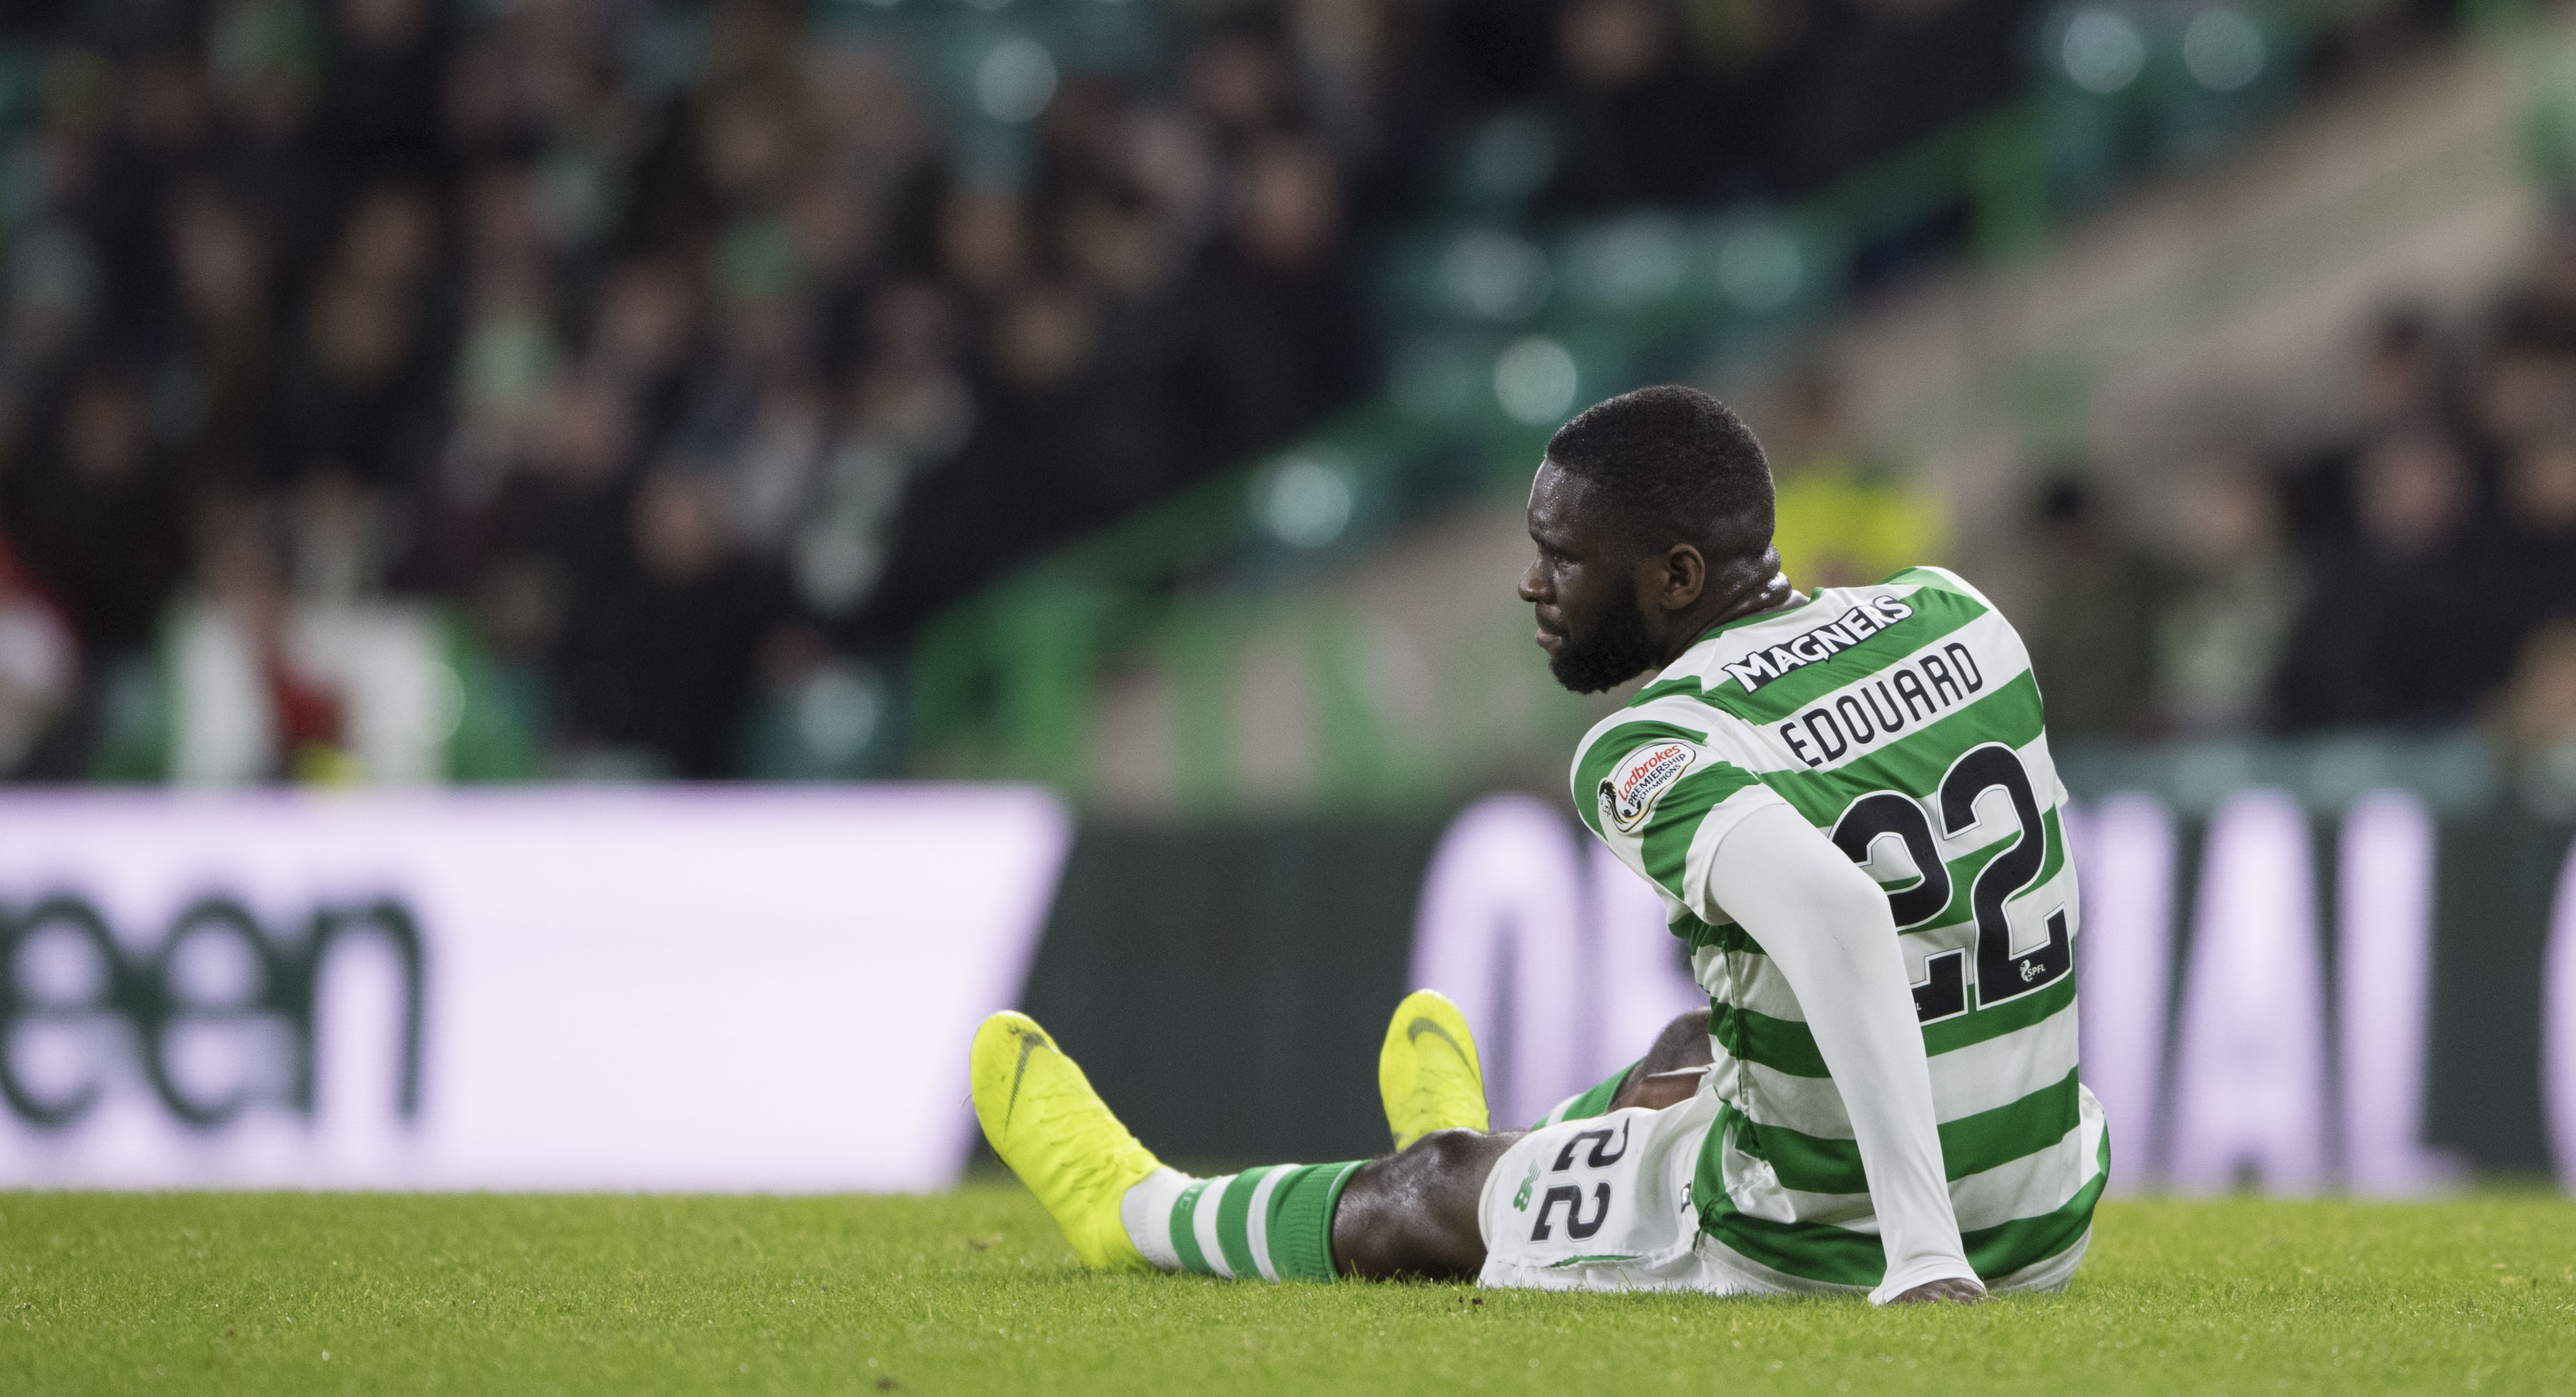 Celtic's Odsonne Edouard goes off injured in the first half (SNS Group / Craig Foy)